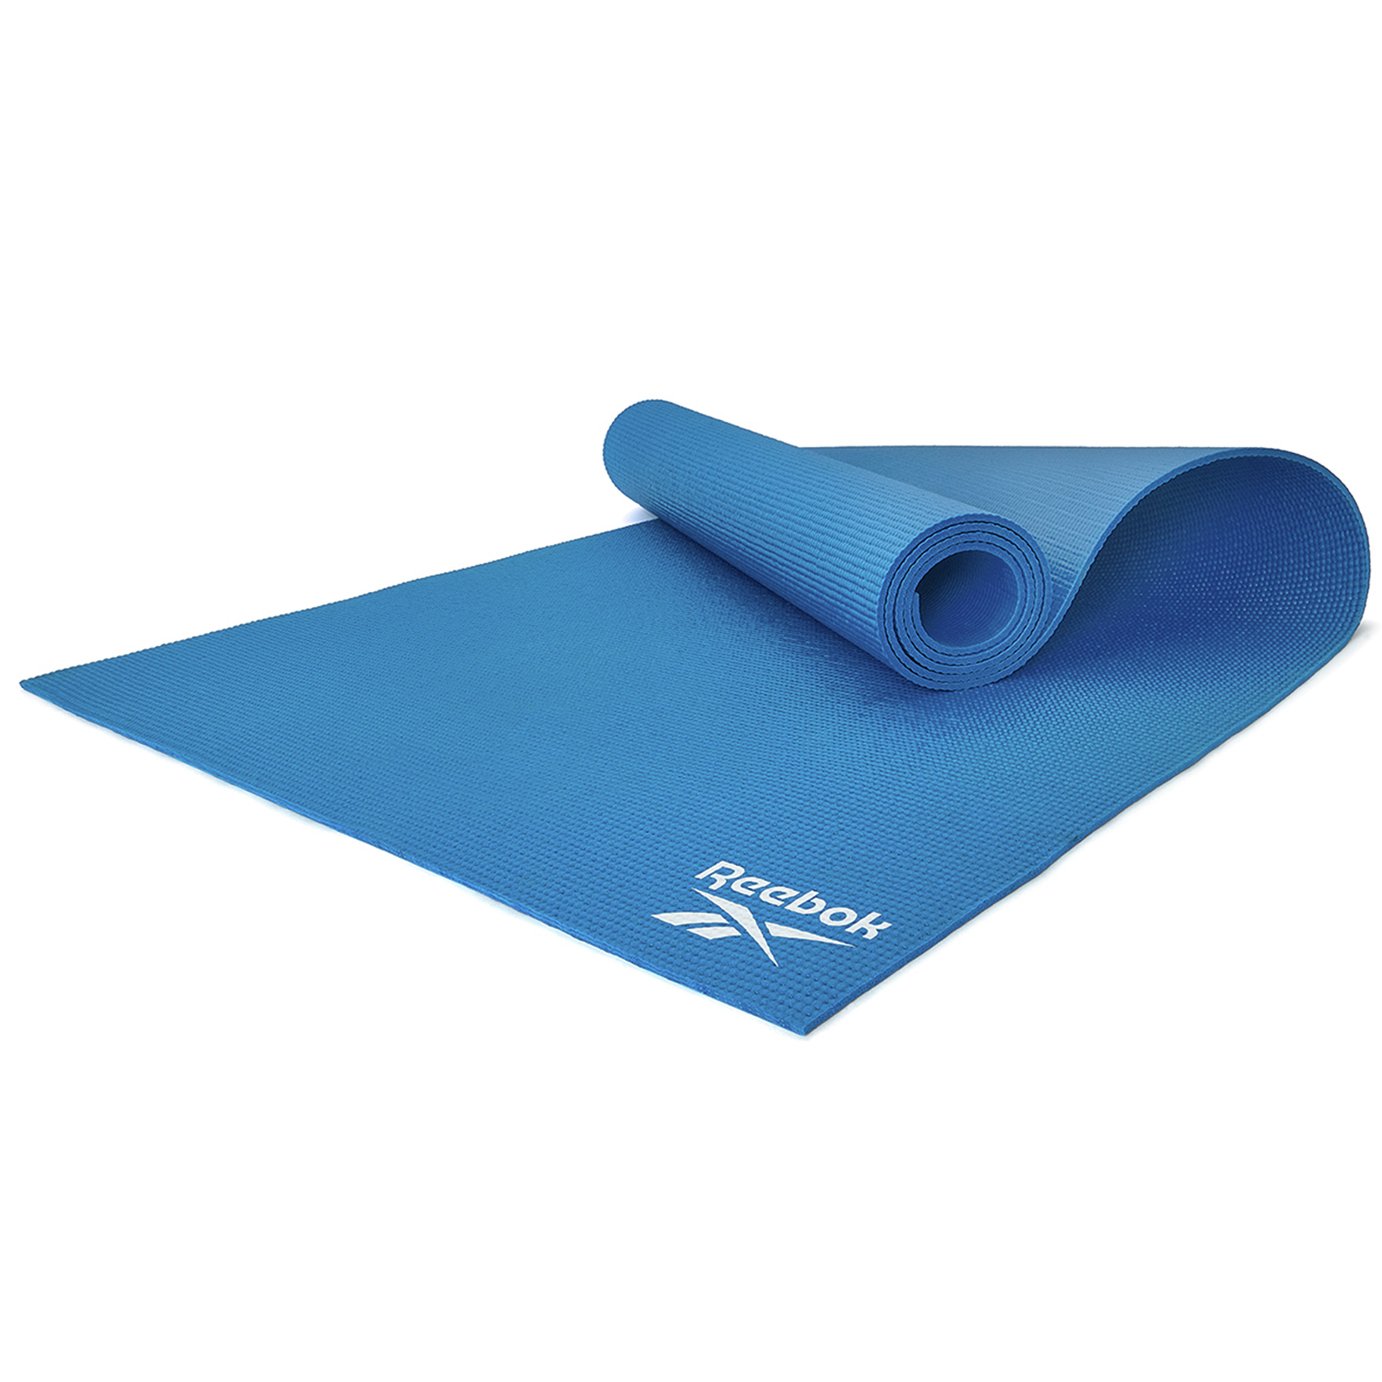 Reebok 4mm Thickness Yoga Exercise Mat 